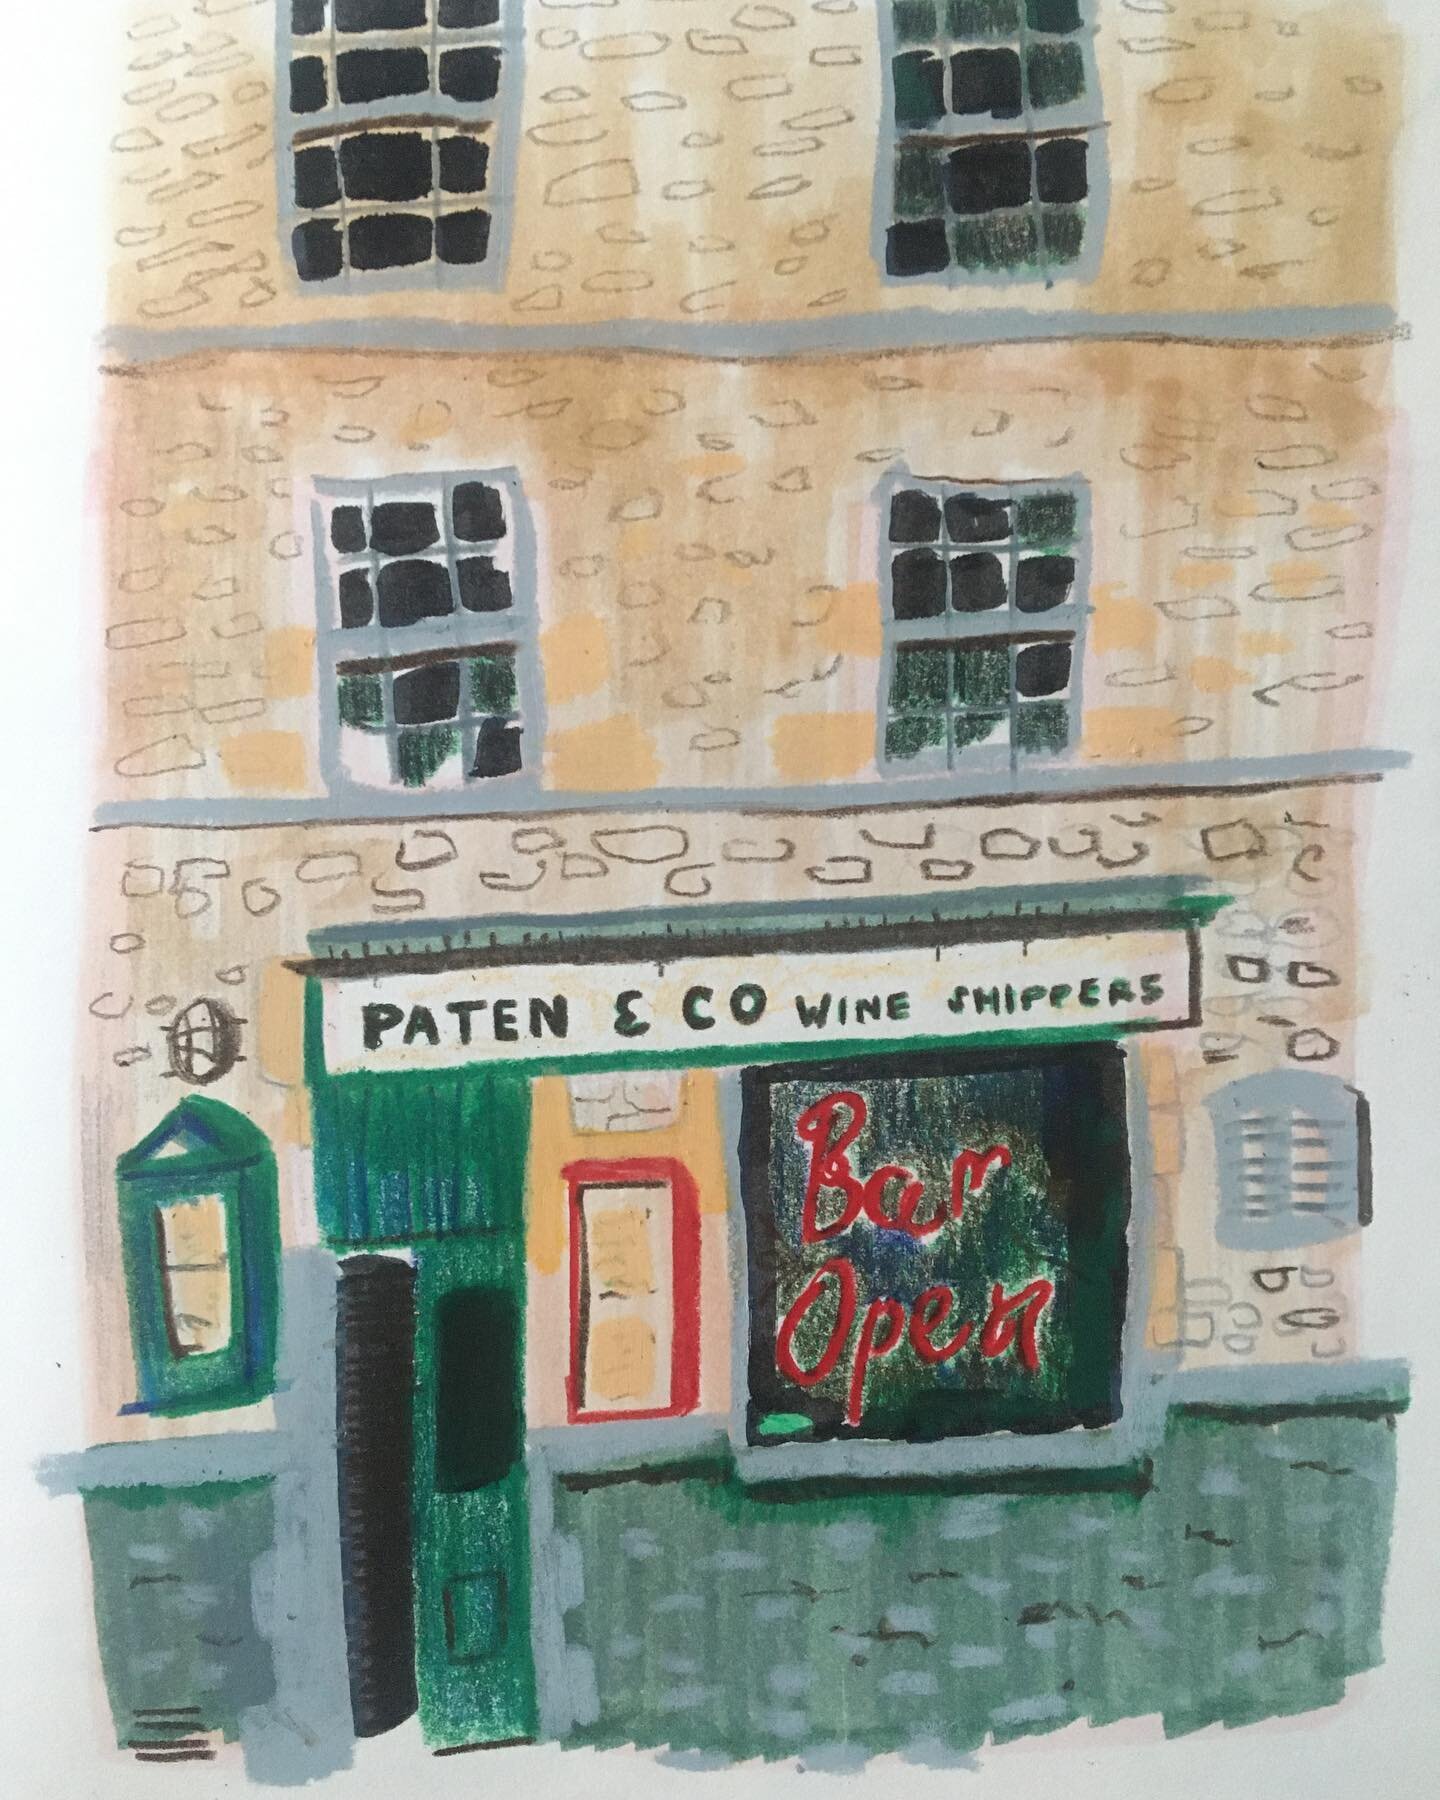 Drawing of Paten and Co Pub, Stamford, Lincolnshire. Such a lovely spot just by the market place 🍻🍷✏️ #storefronts #pubfronts #shopkeepers #baropen #stamford #patenandco #kneadpubs #illustrator #illustration #illustration_daily #illustratorsoninsta